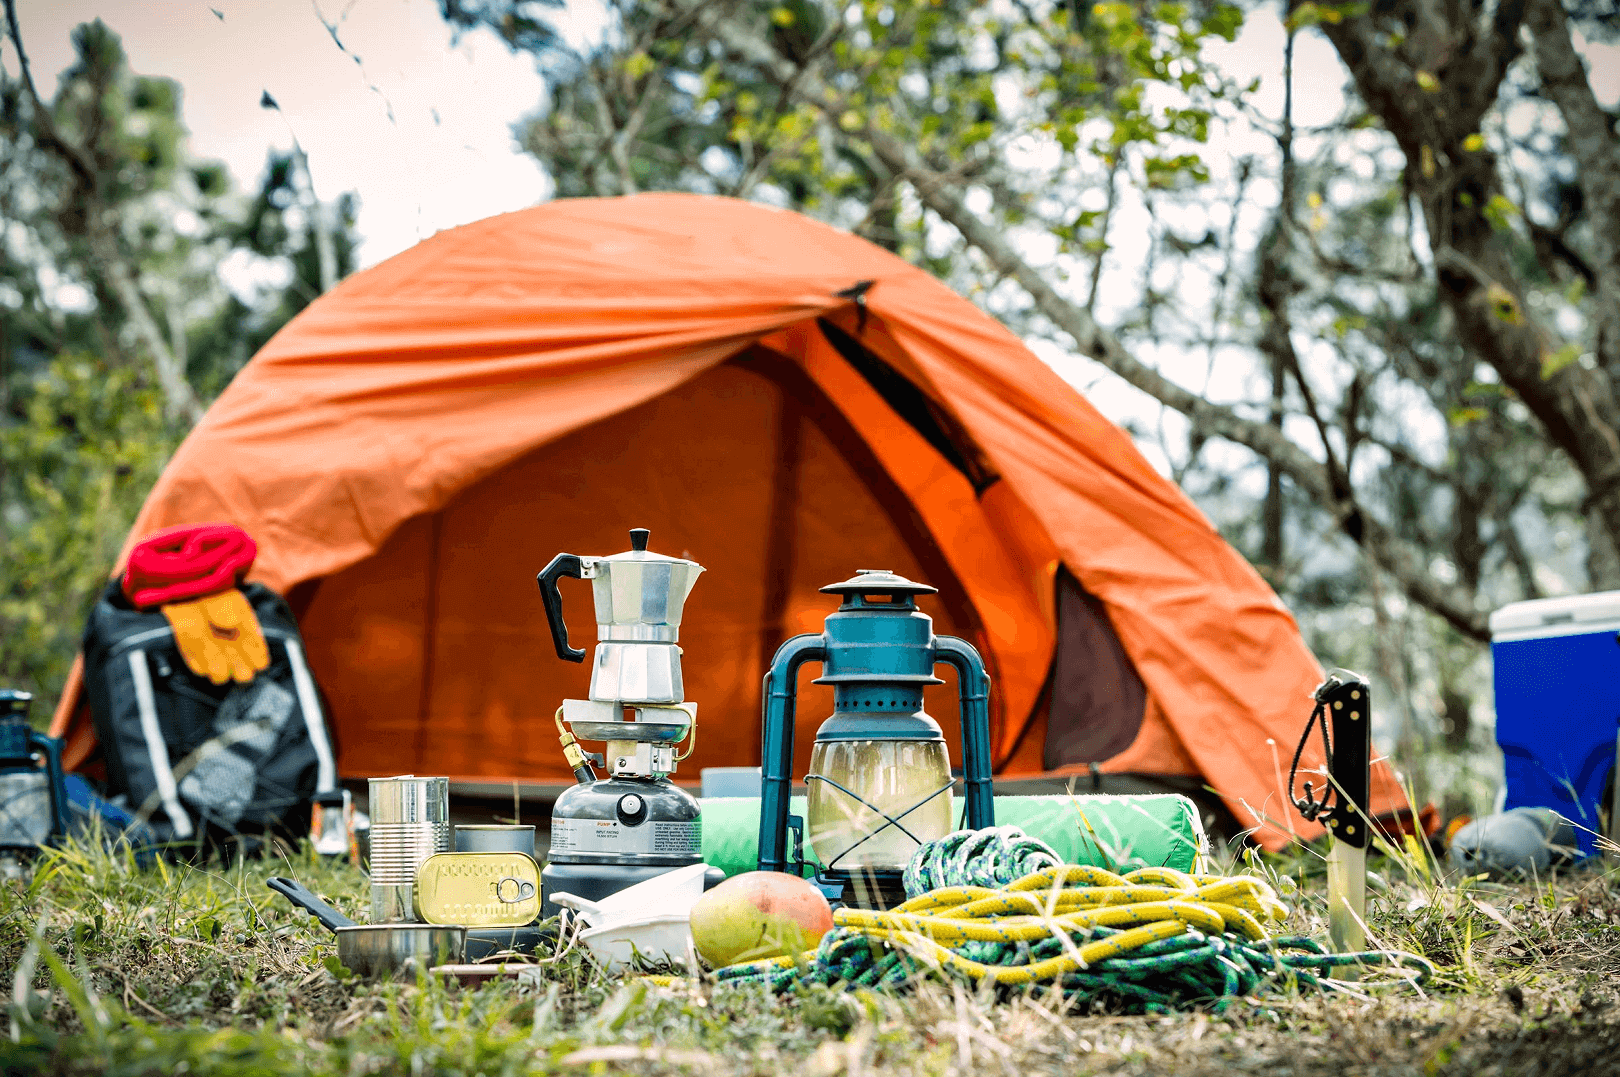 online store outdoor tools and camping gear | toolsstuff